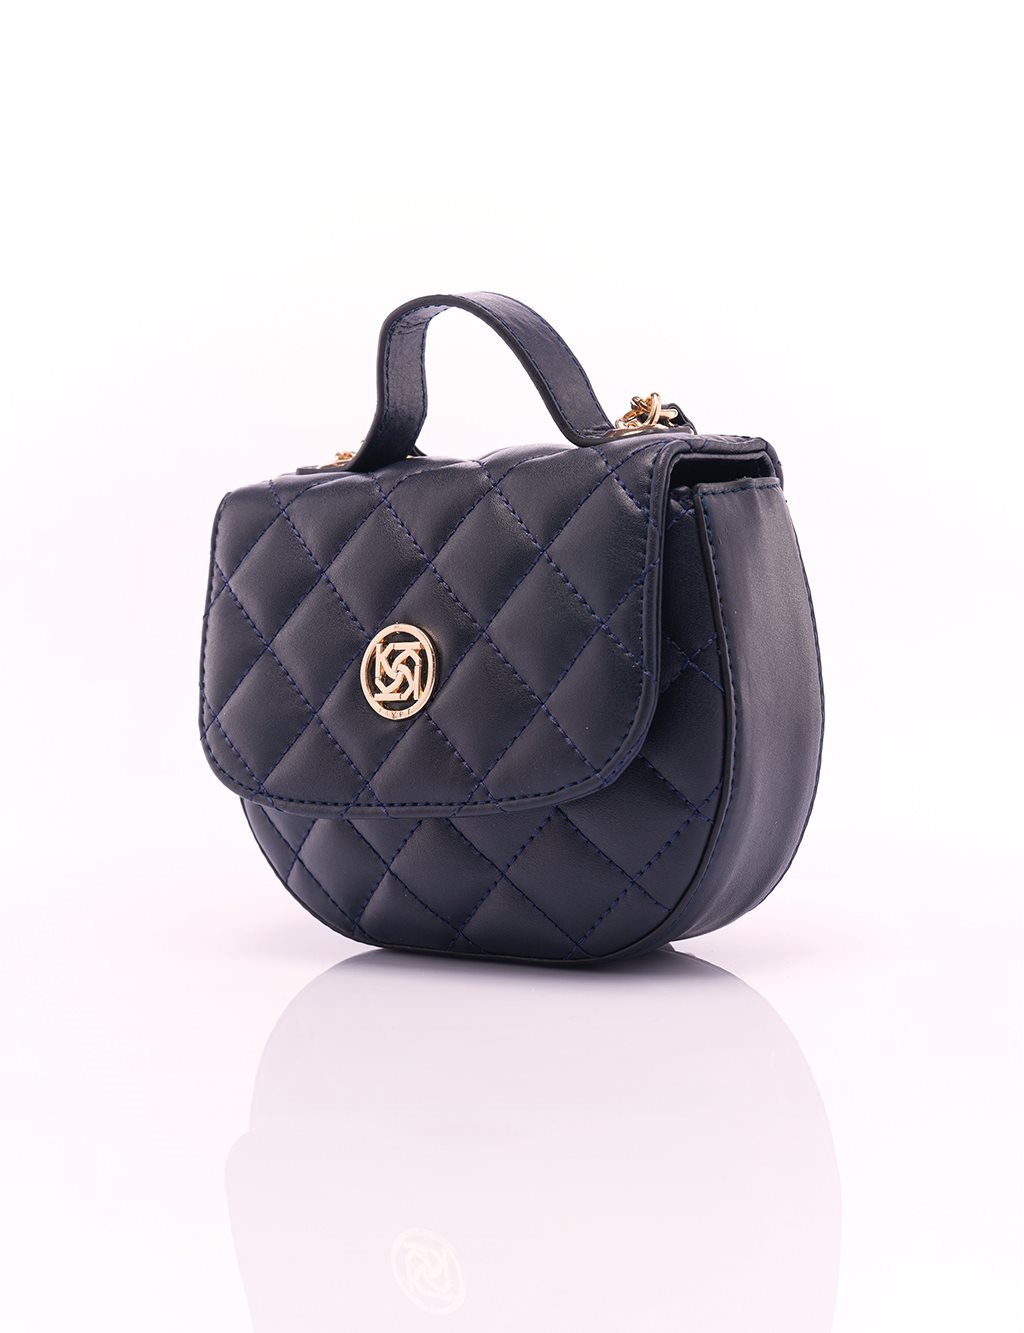 Quilted Faux Leather Bag Navy Blue